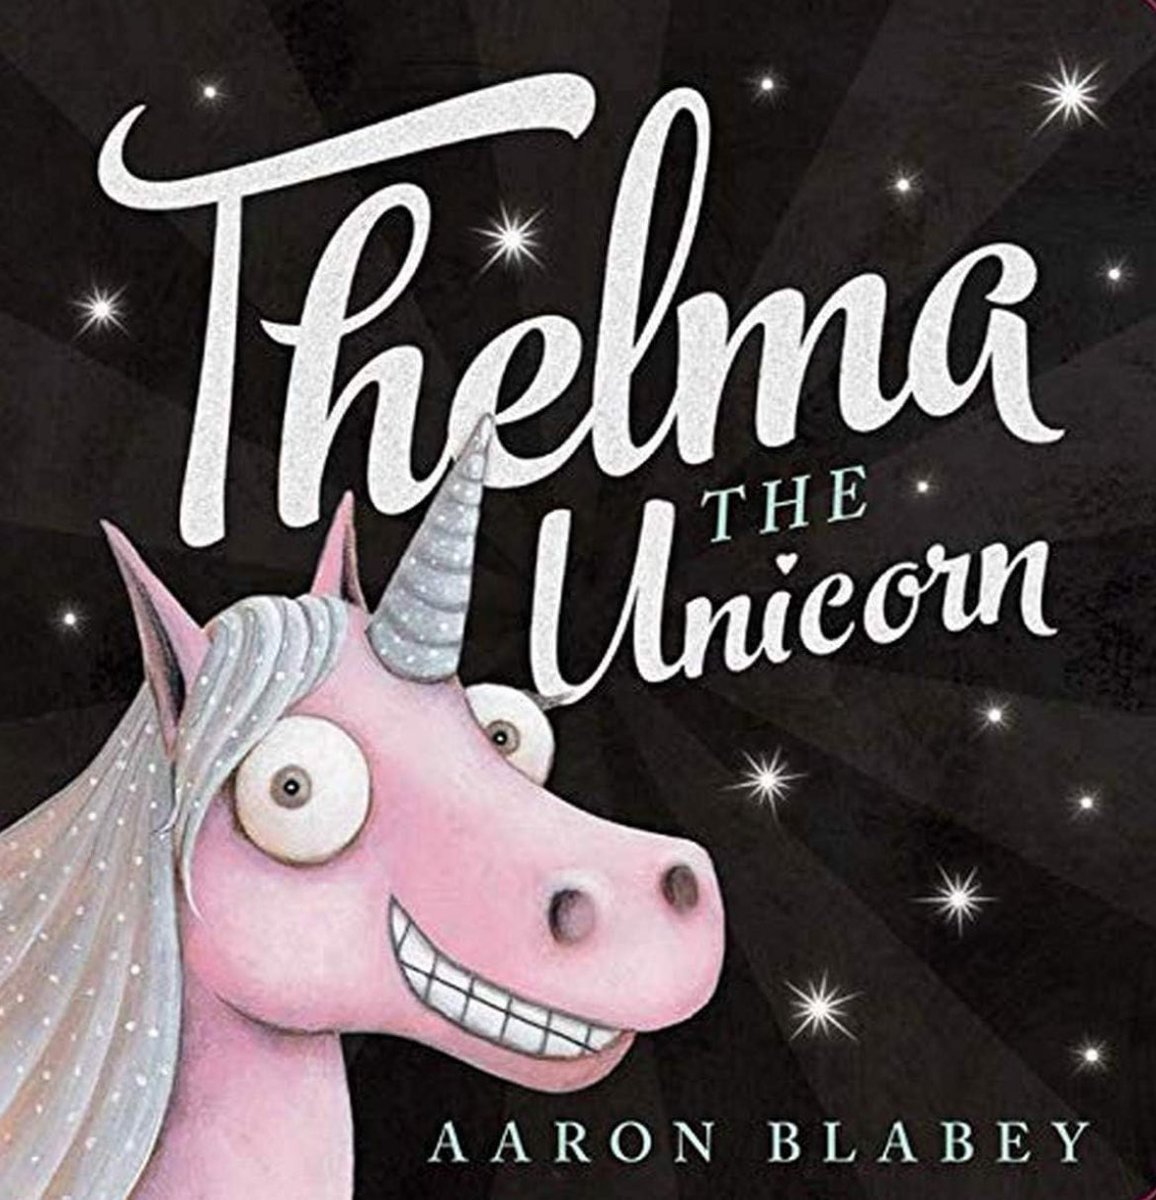 Check out the trailer for the upcoming @netflix animated movie - Thelma the Unicorn! So cool to see Aaron Blabey’s brilliant @ScholasticAUS picture book brought to life like this! The Bad Guys movie was awesome. Can’t wait to watch this one! 😍 🦄